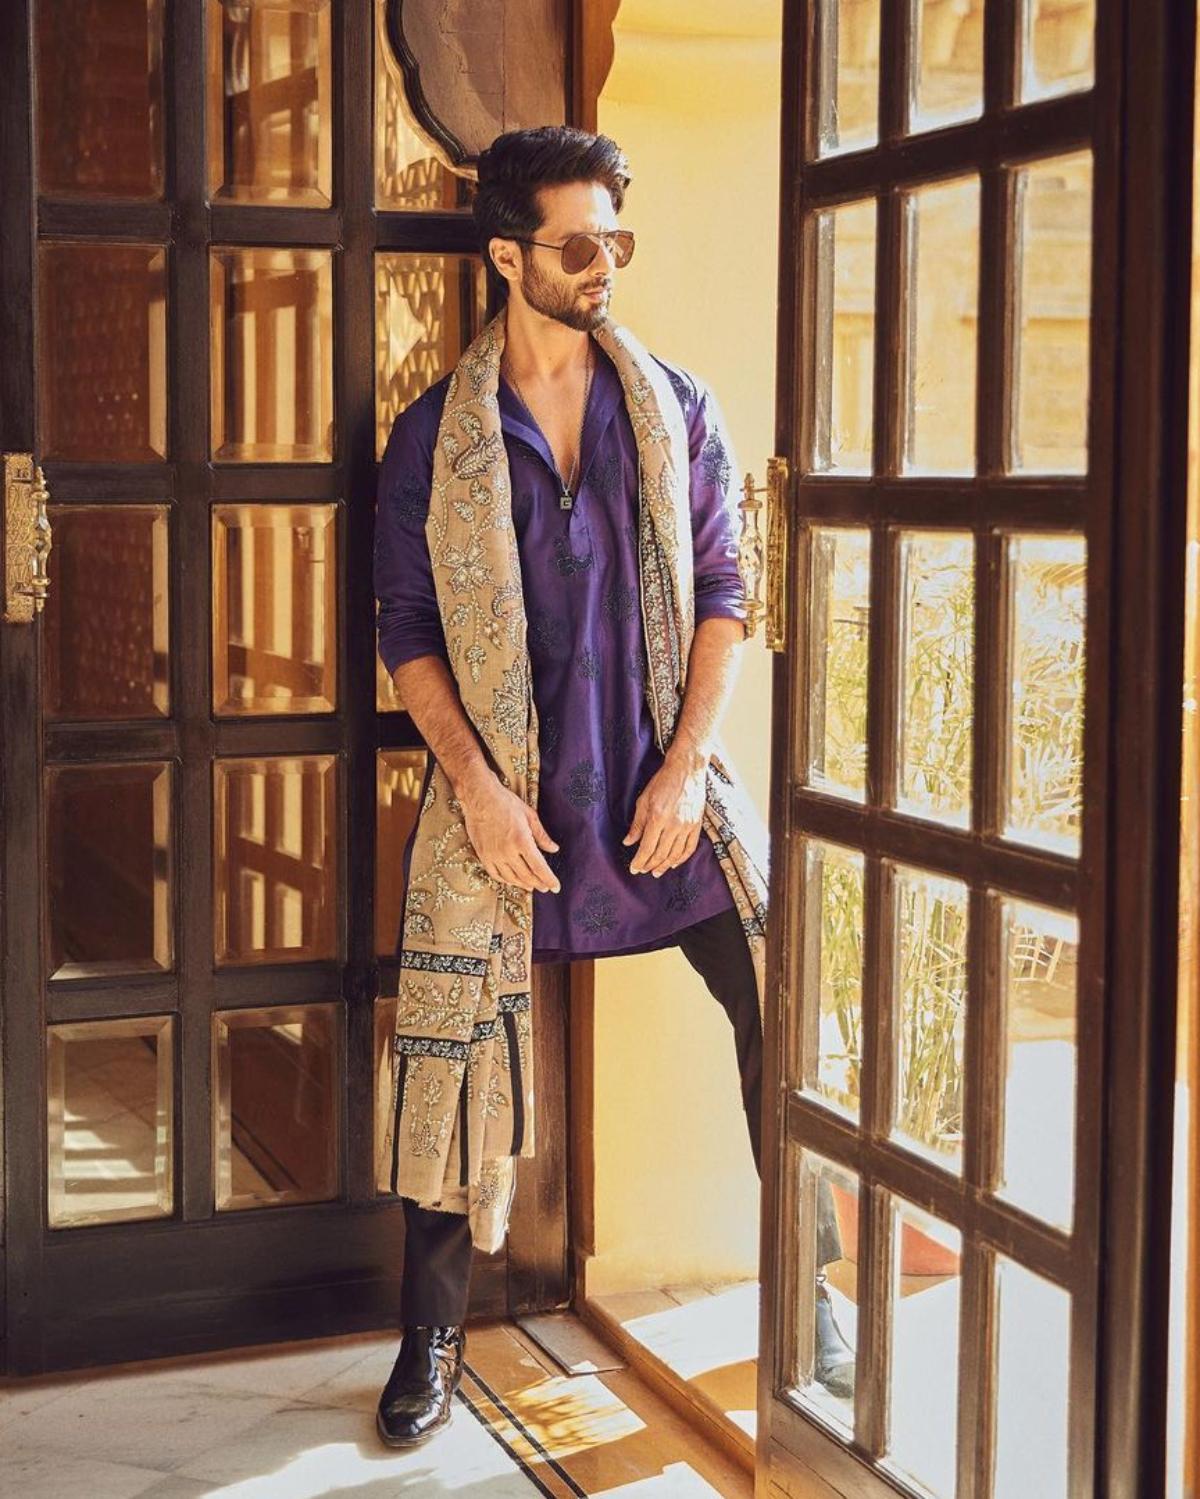 Shahid Kapoor steals the show every time he pulls off an ethnic ensemble. The OG Punjabi munda of Bollywood, Shahid looks eternal as he channels his inner desi boy with a chic navy blue chikankari kurta. Shahid who looks stunning in darker shades, exudes bossy vibes as he pulls off dark brown trousers with his blue kurta. The 'Kaminey' star stands out as he sports a beige floral printed shawl over his blue and brown ethnic attire. 